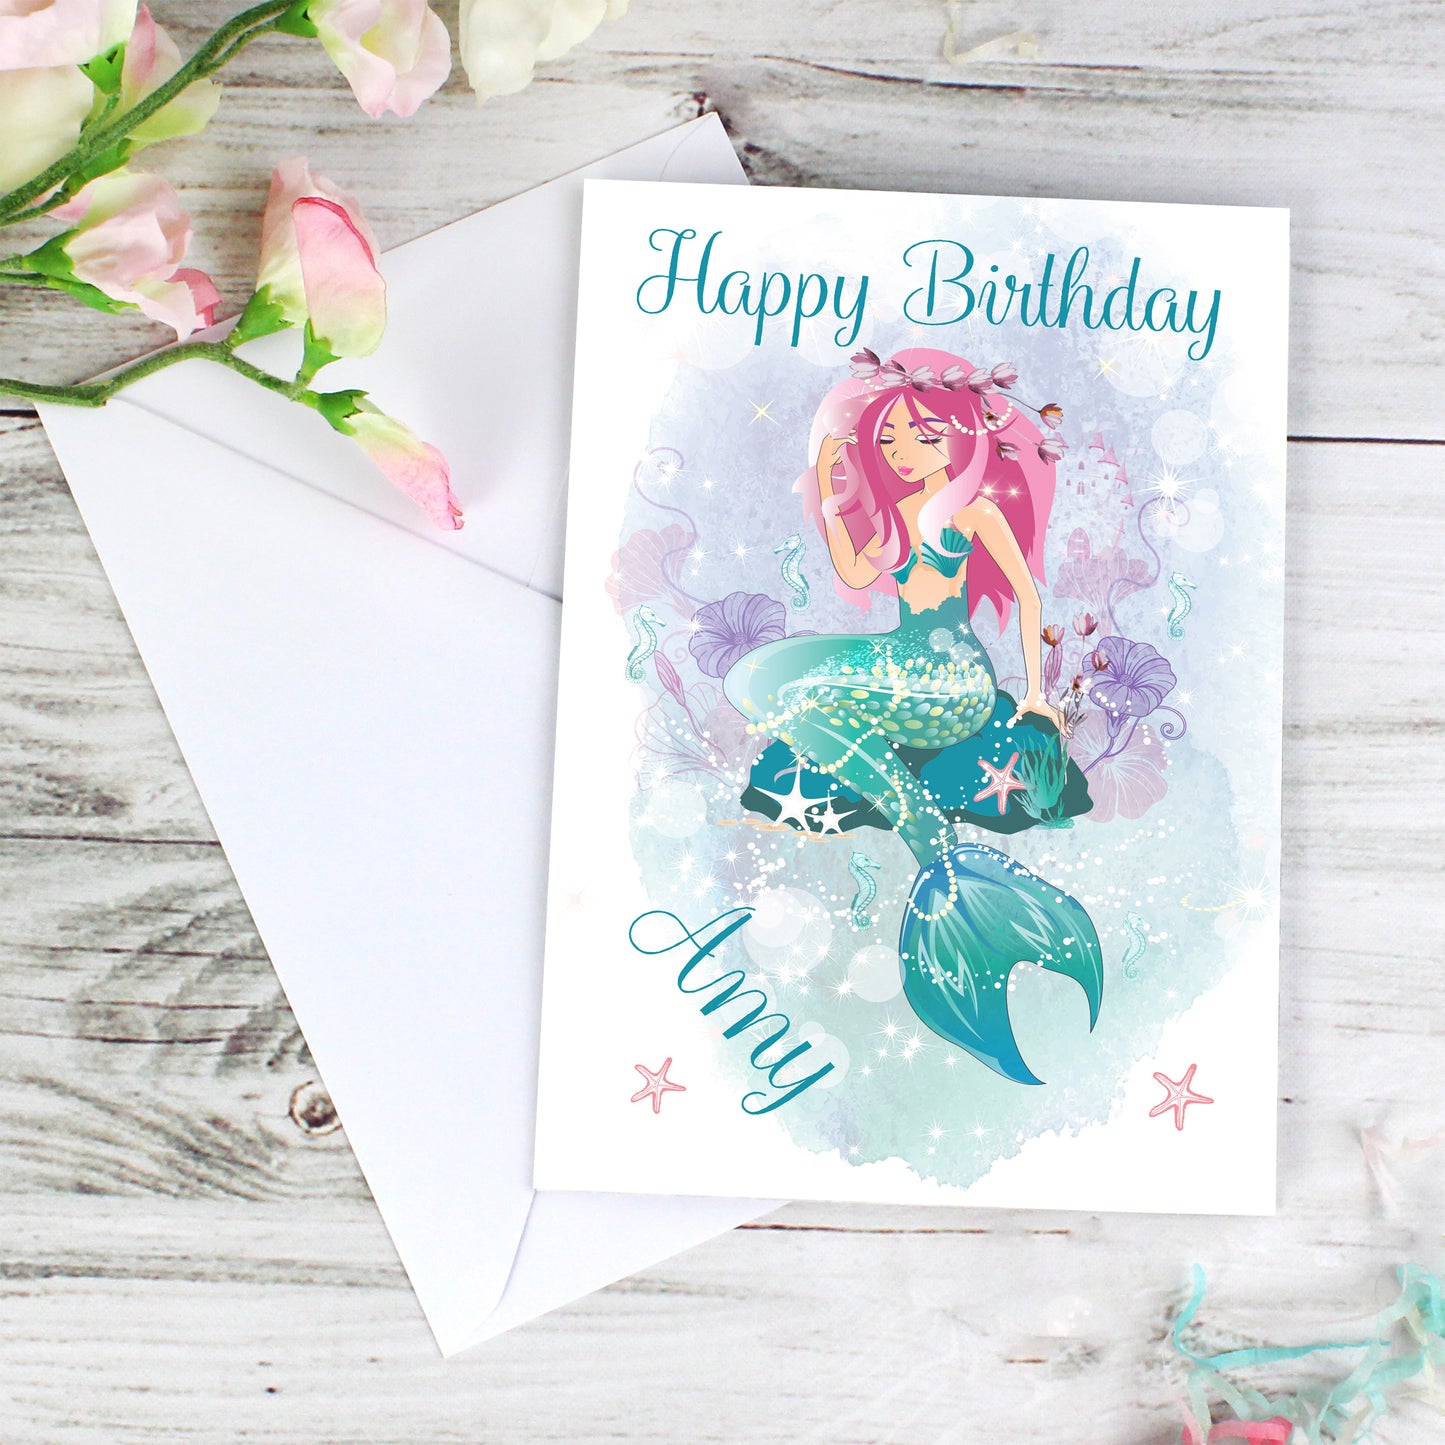 Personalised Mermaid Card Add Any Name - Personalise It!